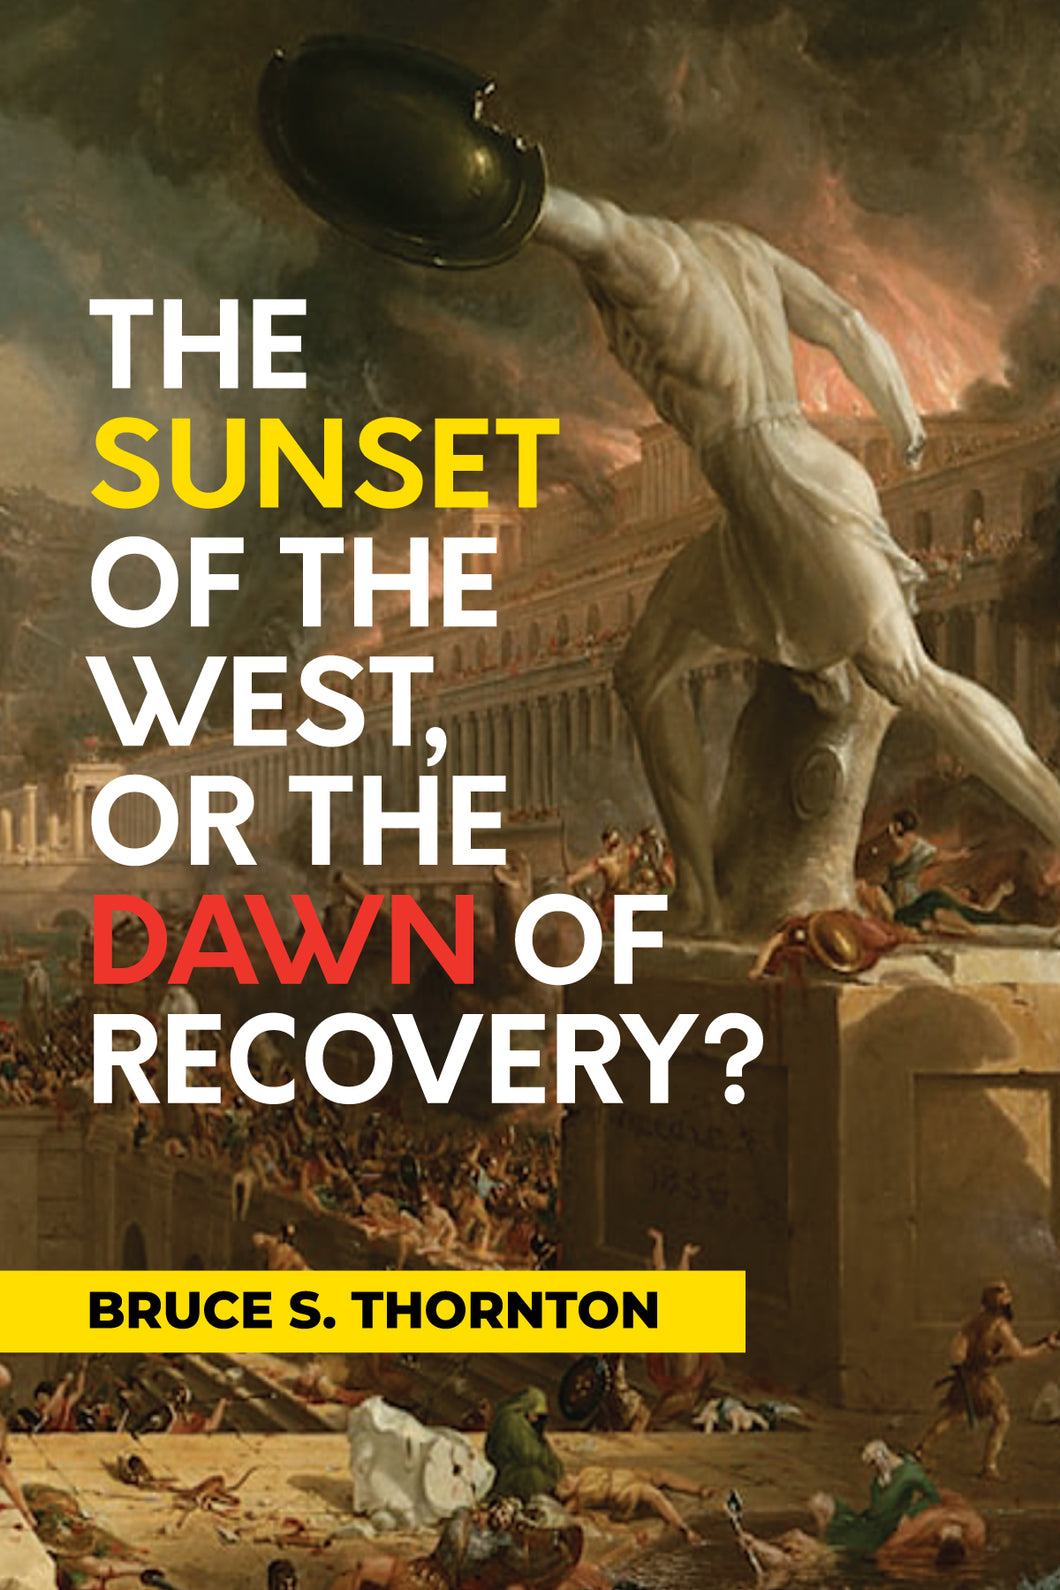 The Sunset Of The West, Or The Dawn Of Recovery?